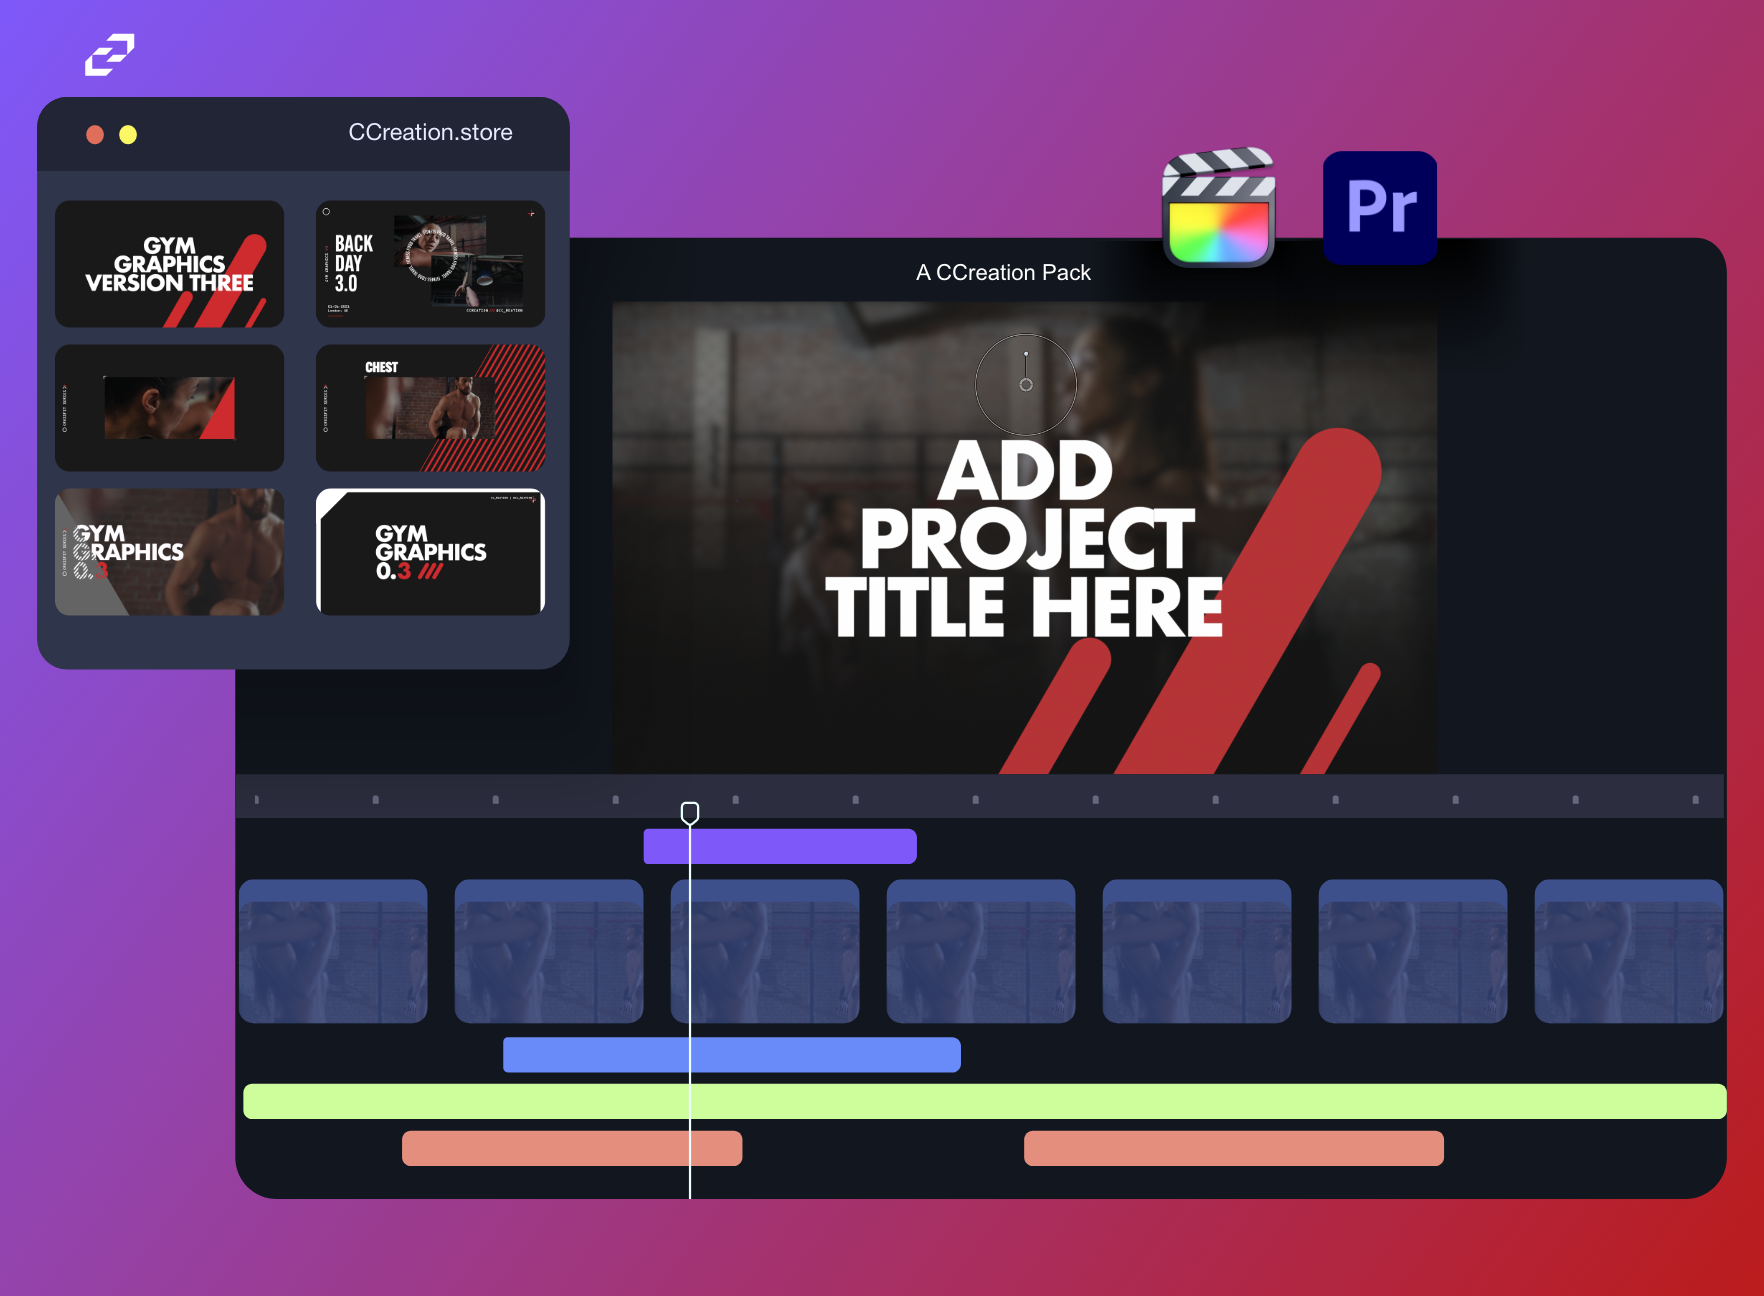 Fitness Creator Bundle - Final Cut Pro, Premiere Pro Bundle including Titles, Transitions, Times and More - C Creation Store